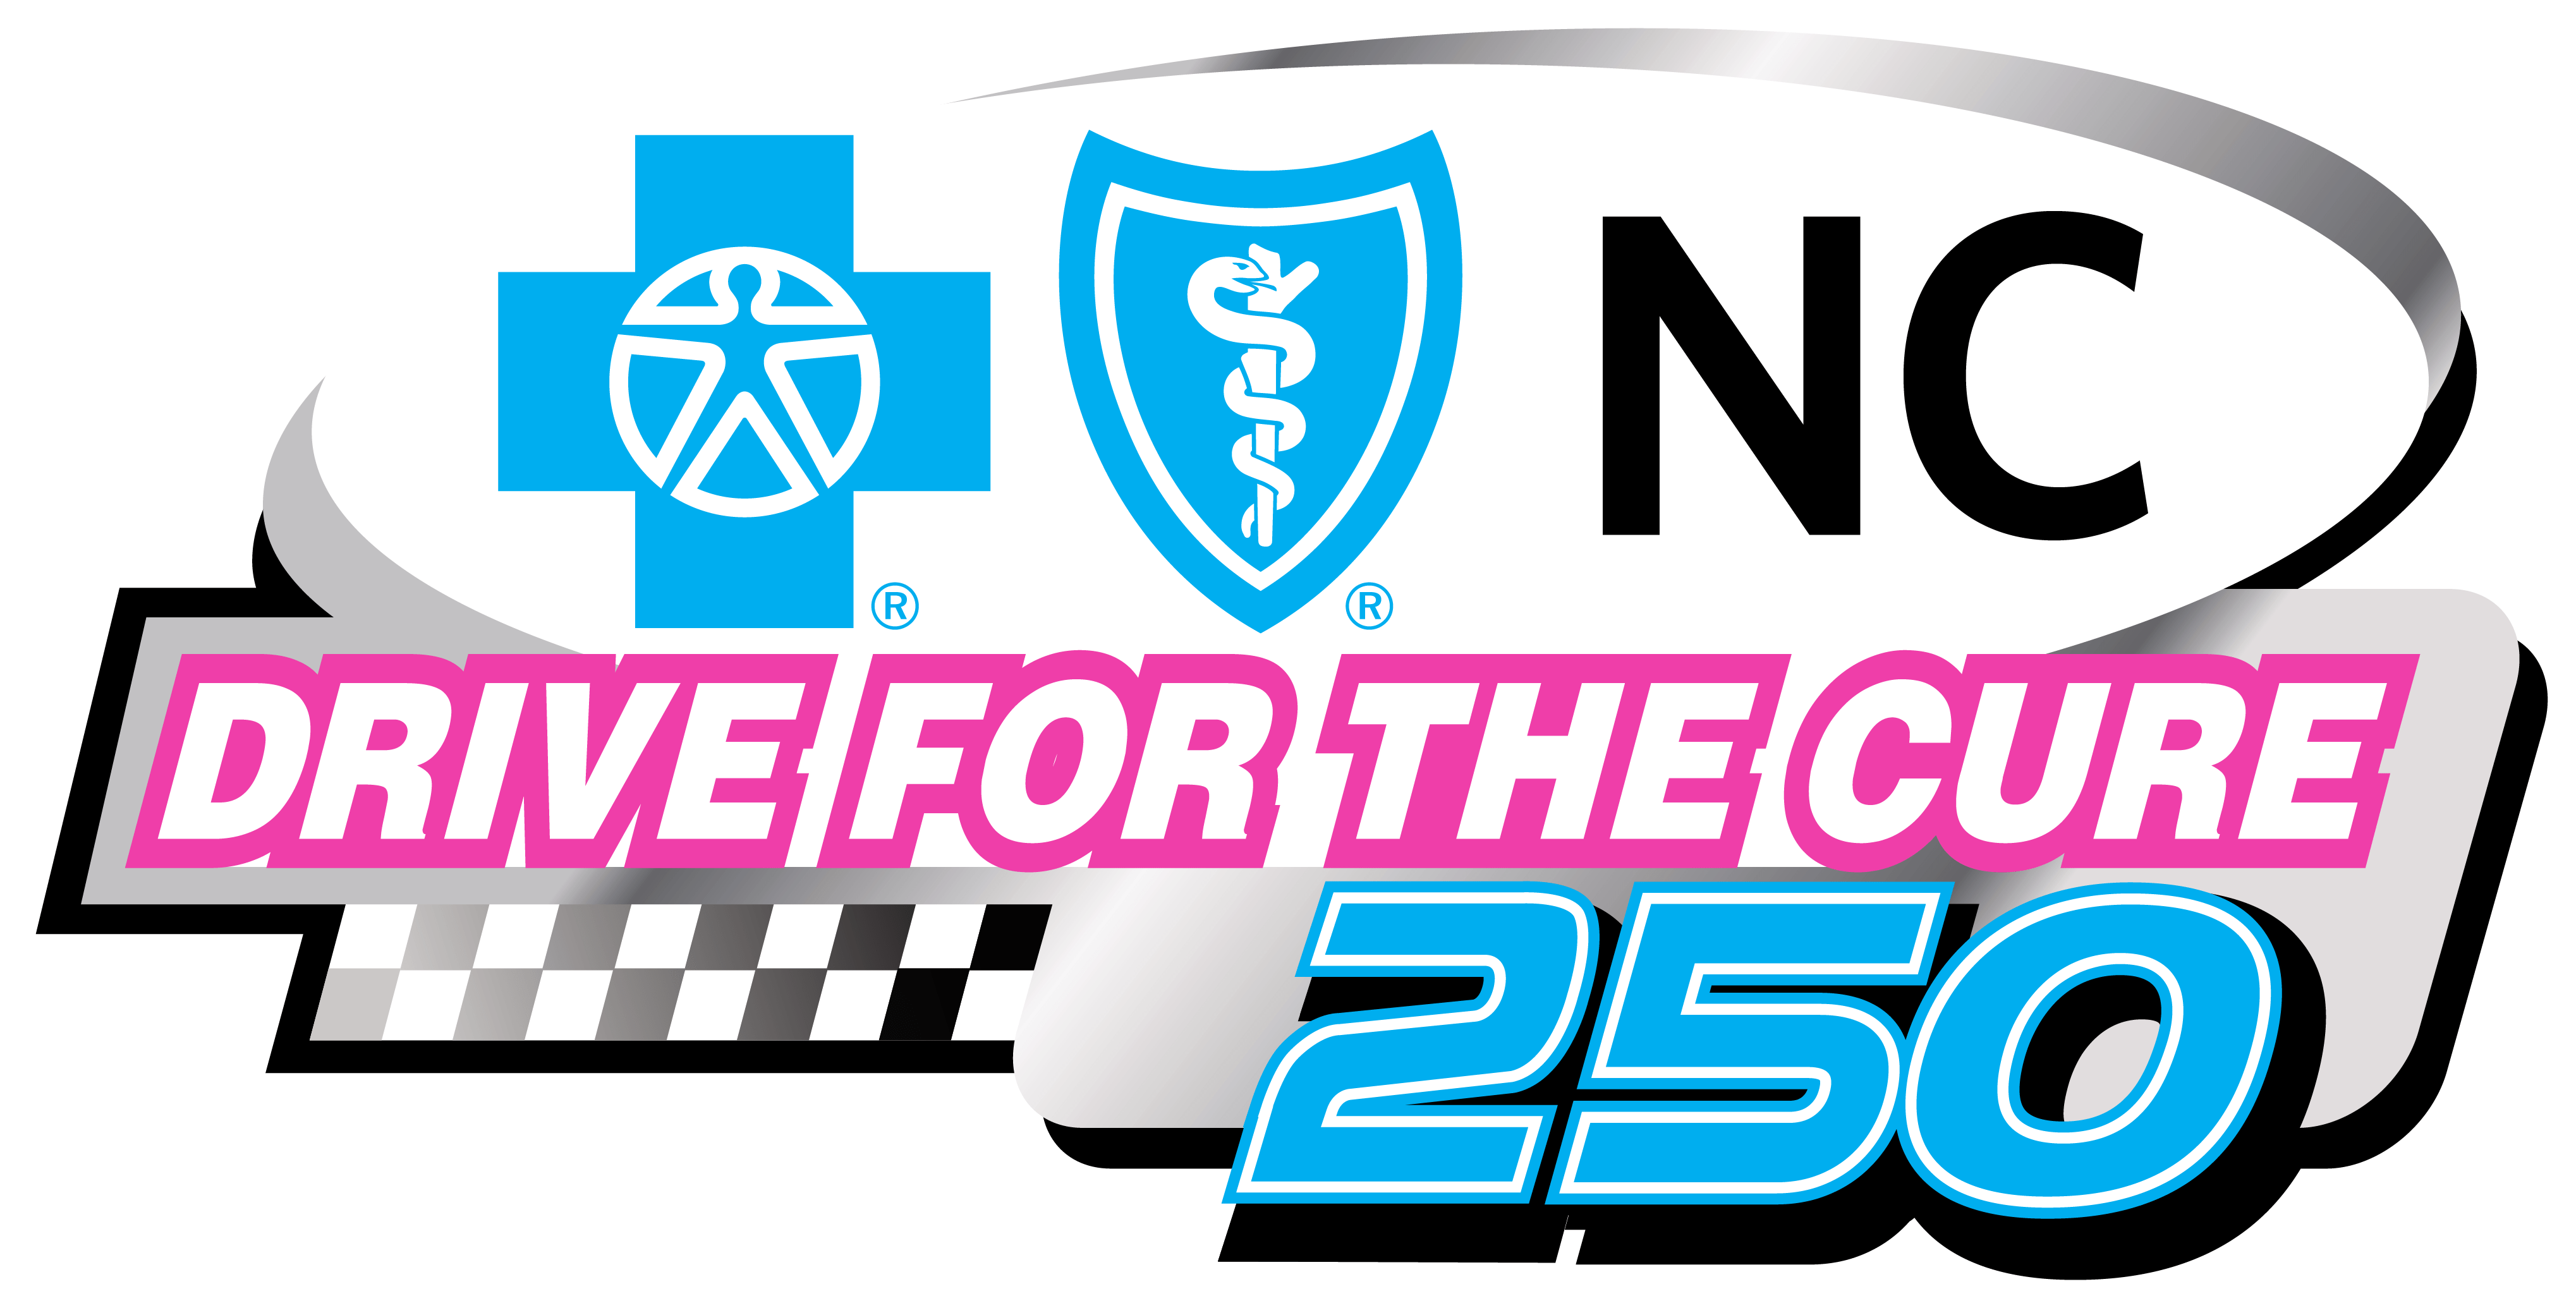 Drive for the Cure 250